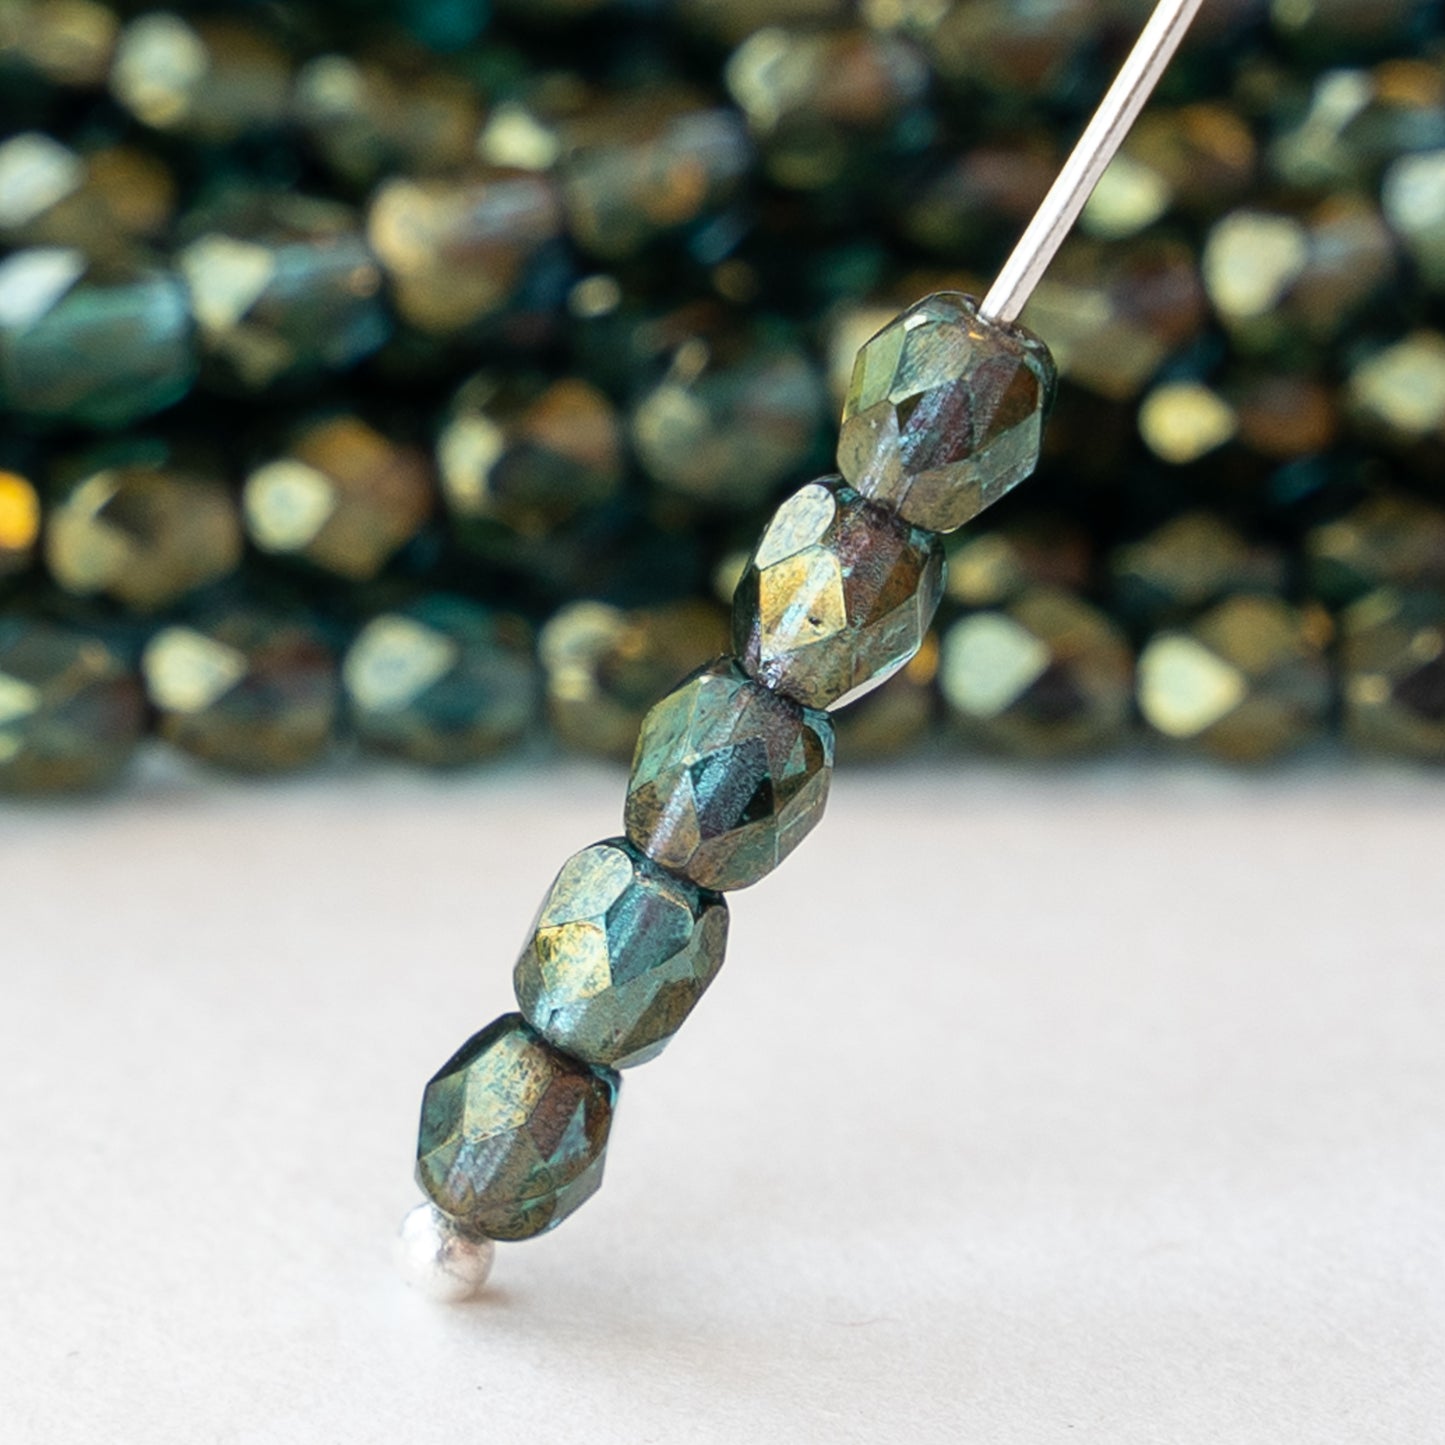 Load image into Gallery viewer, 4mm Round Firepolished Beads - Deep Teal Luster - 50 beads
